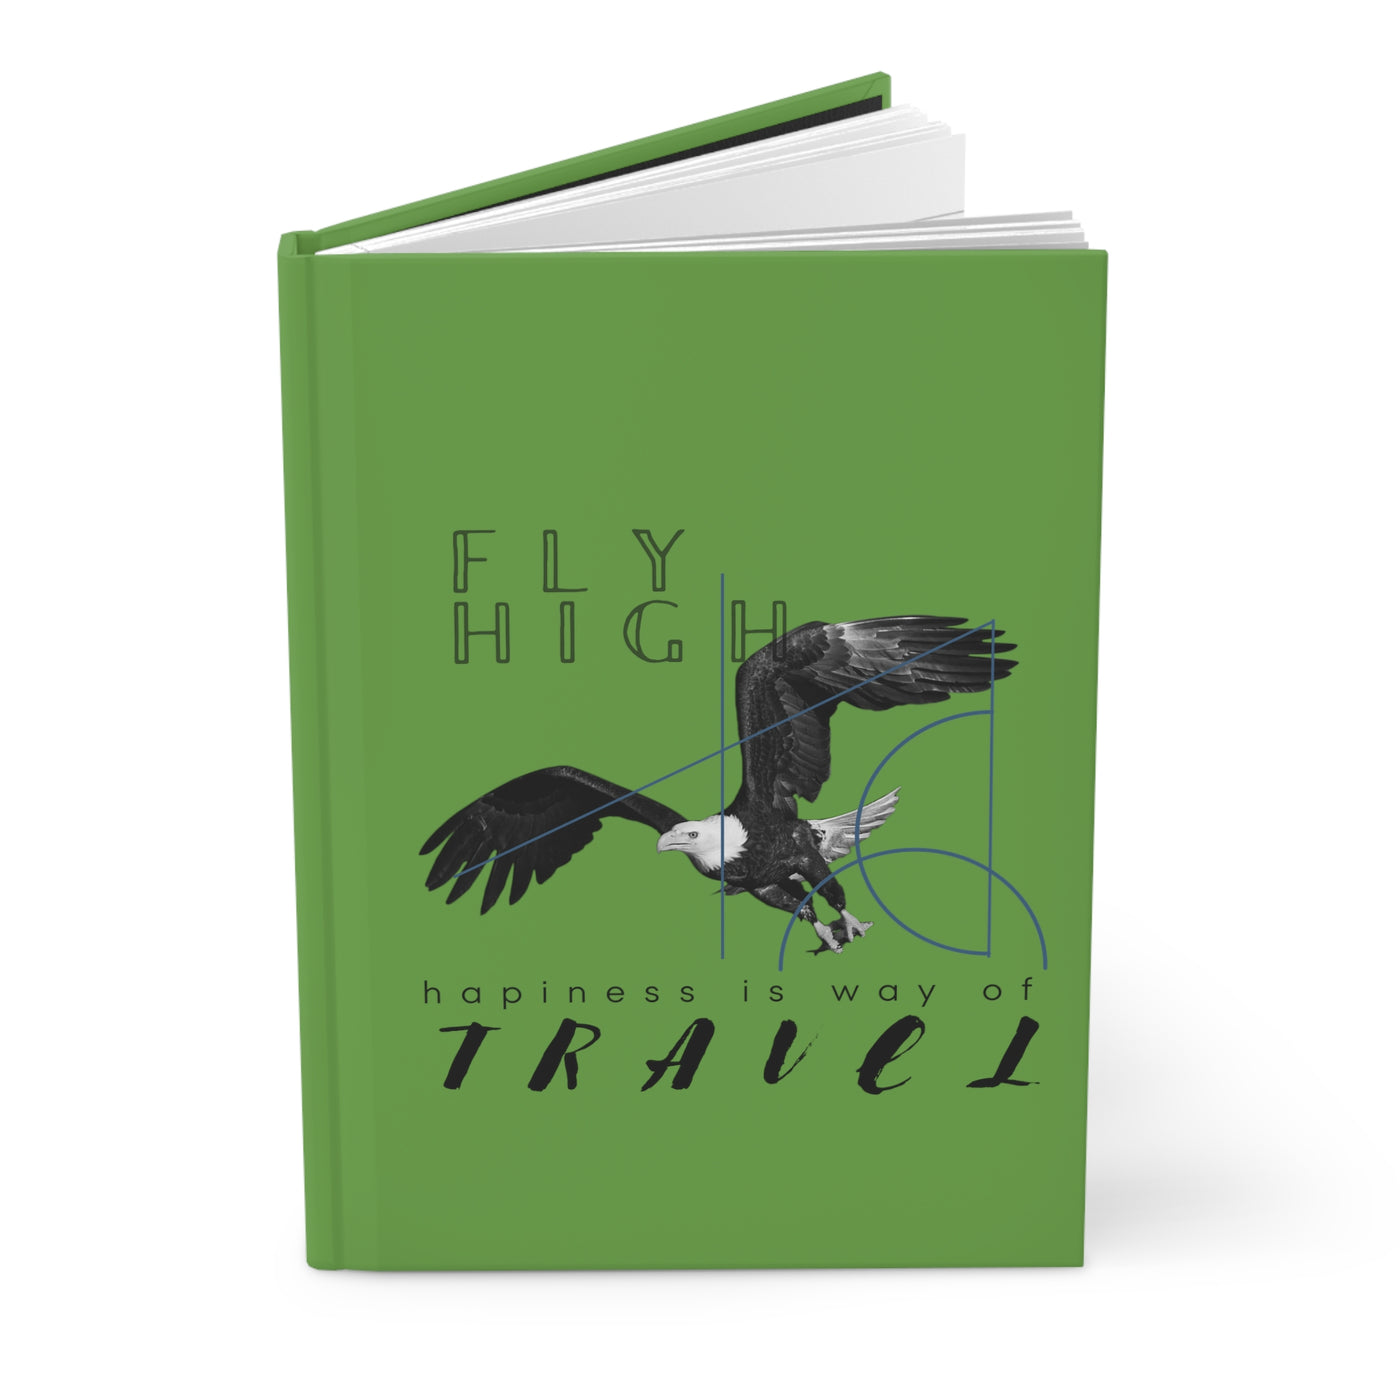 Fly high happiness is way of travel Hardcover Journal Matte